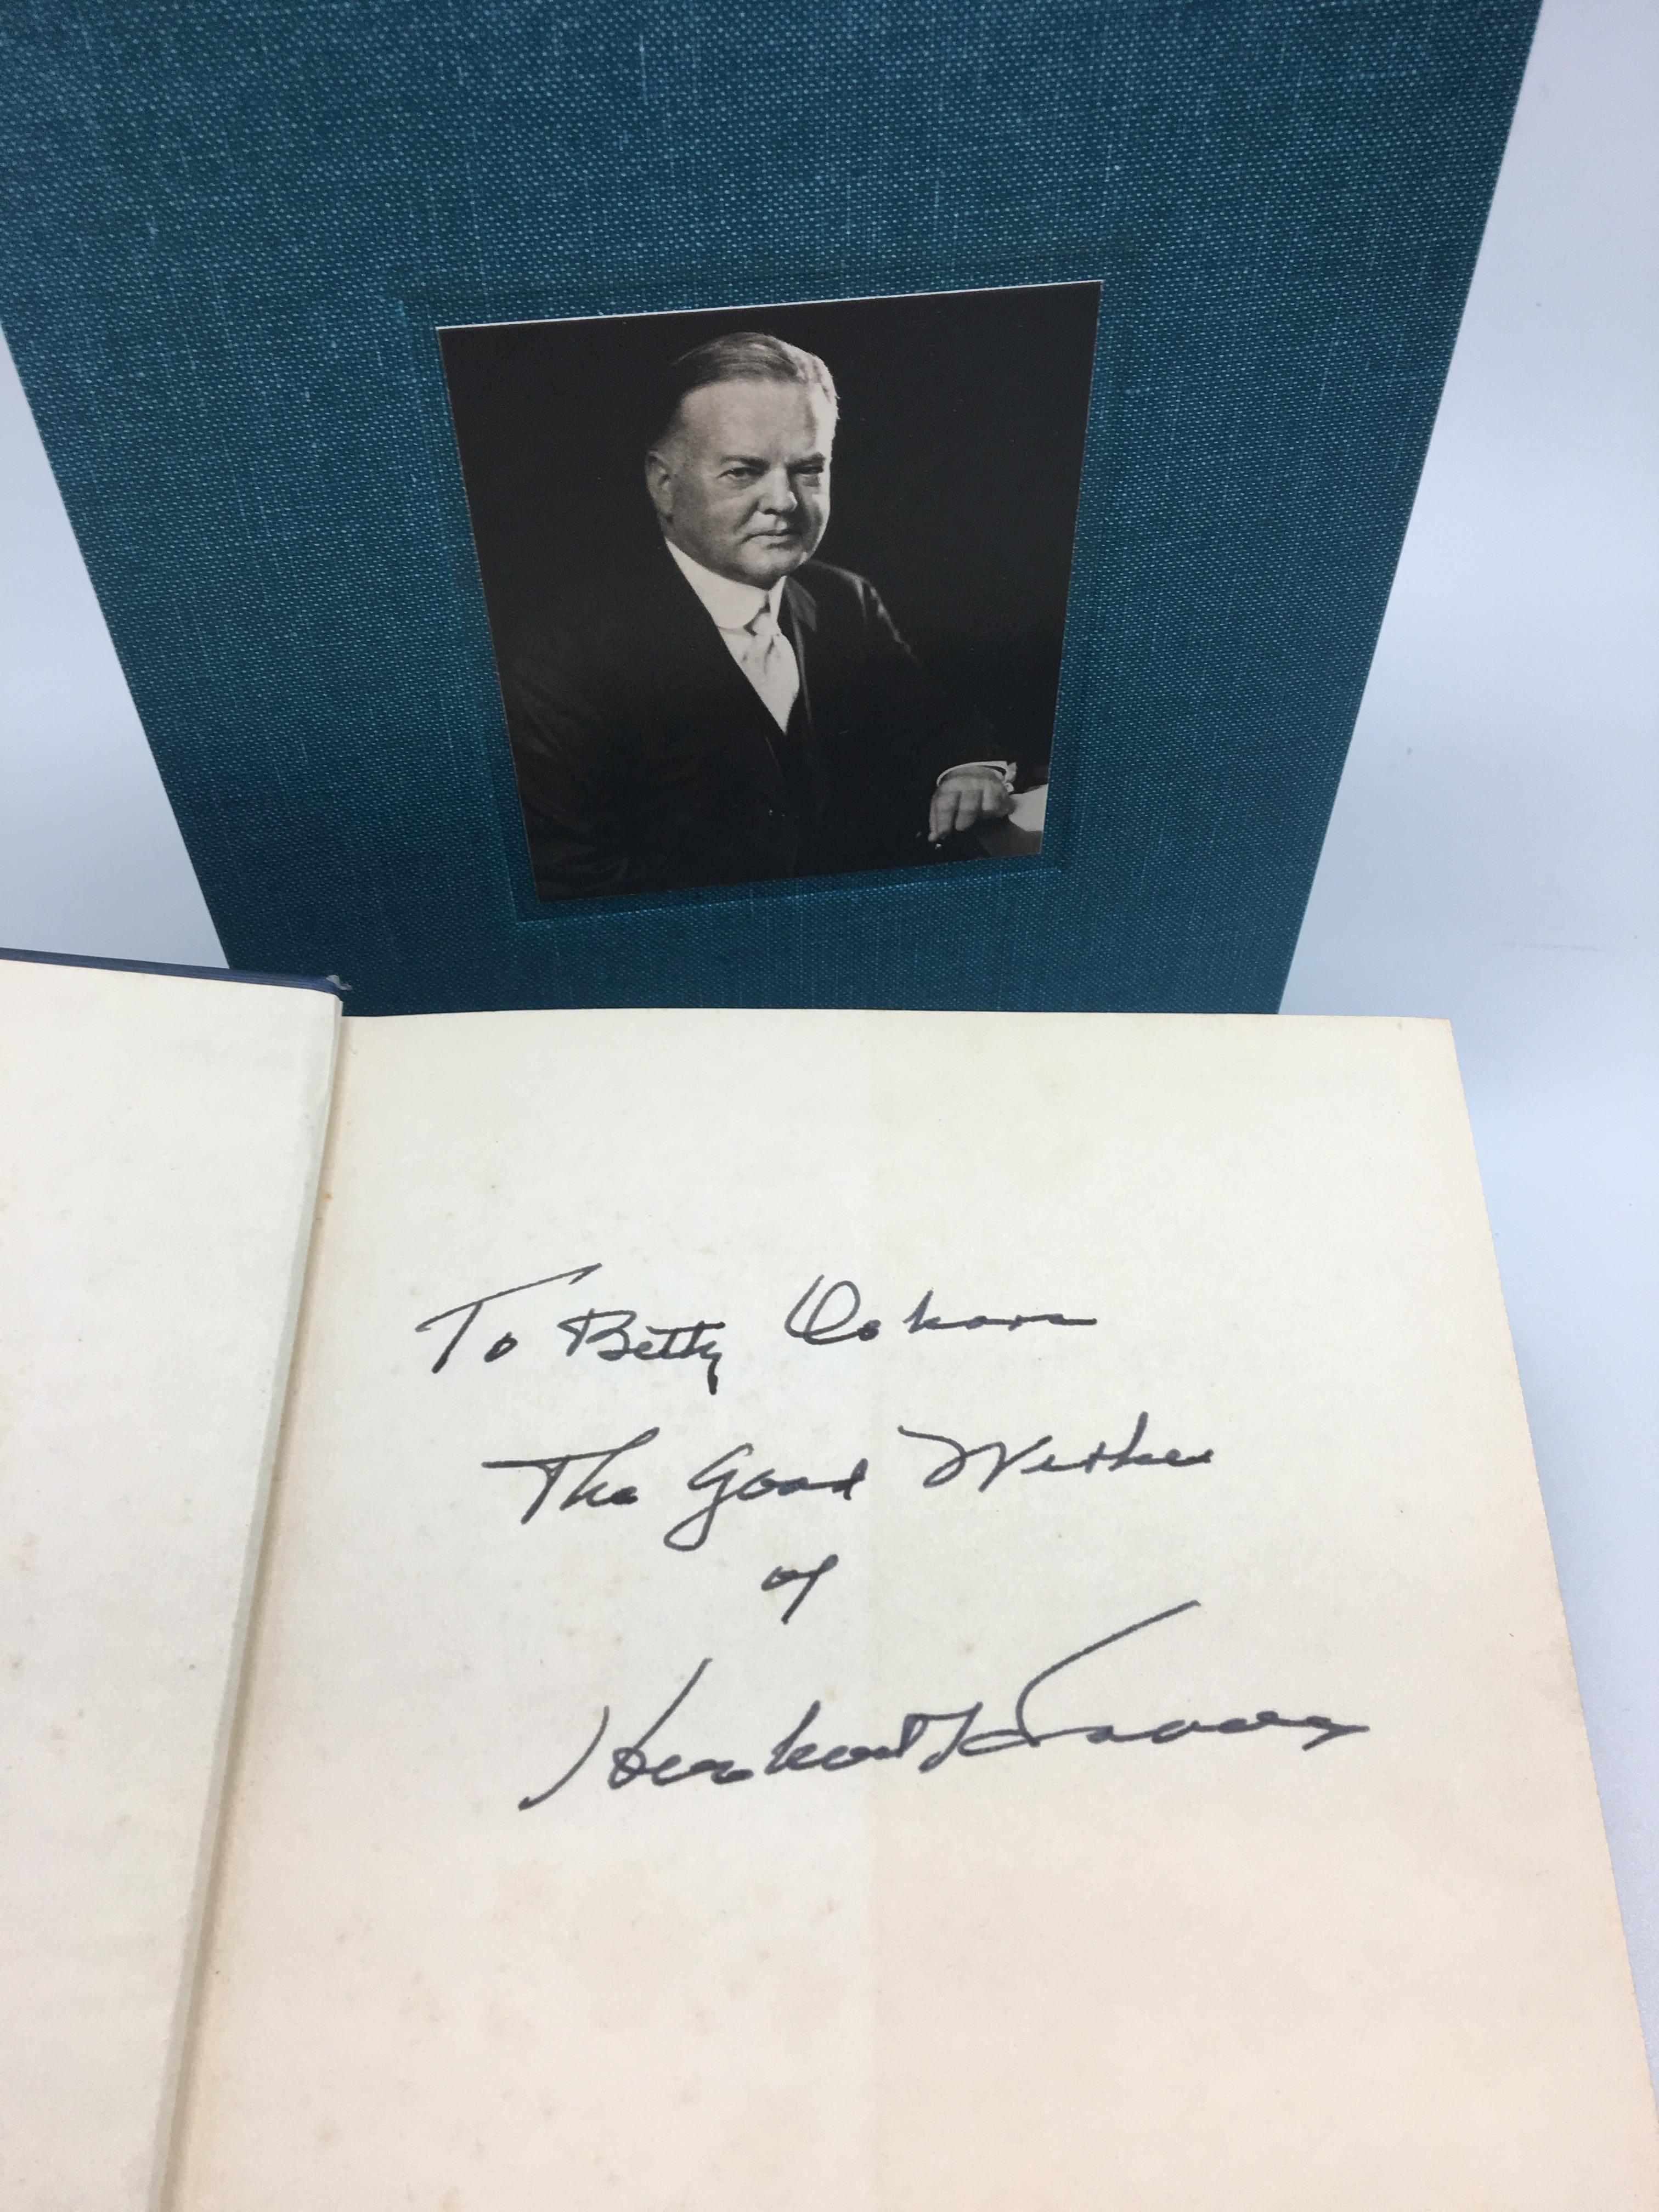 Hoover, Herbert. The Ordeal of Woodrow Wilson. New York: McGraw-Hill, 1958. Signed and inscribed by Herbert Hoover. Sixth printing. Original dust jacket and housed in a custom slipcase.

This signed copy of Herbert Hoover’s The Ordeal of Woodrow